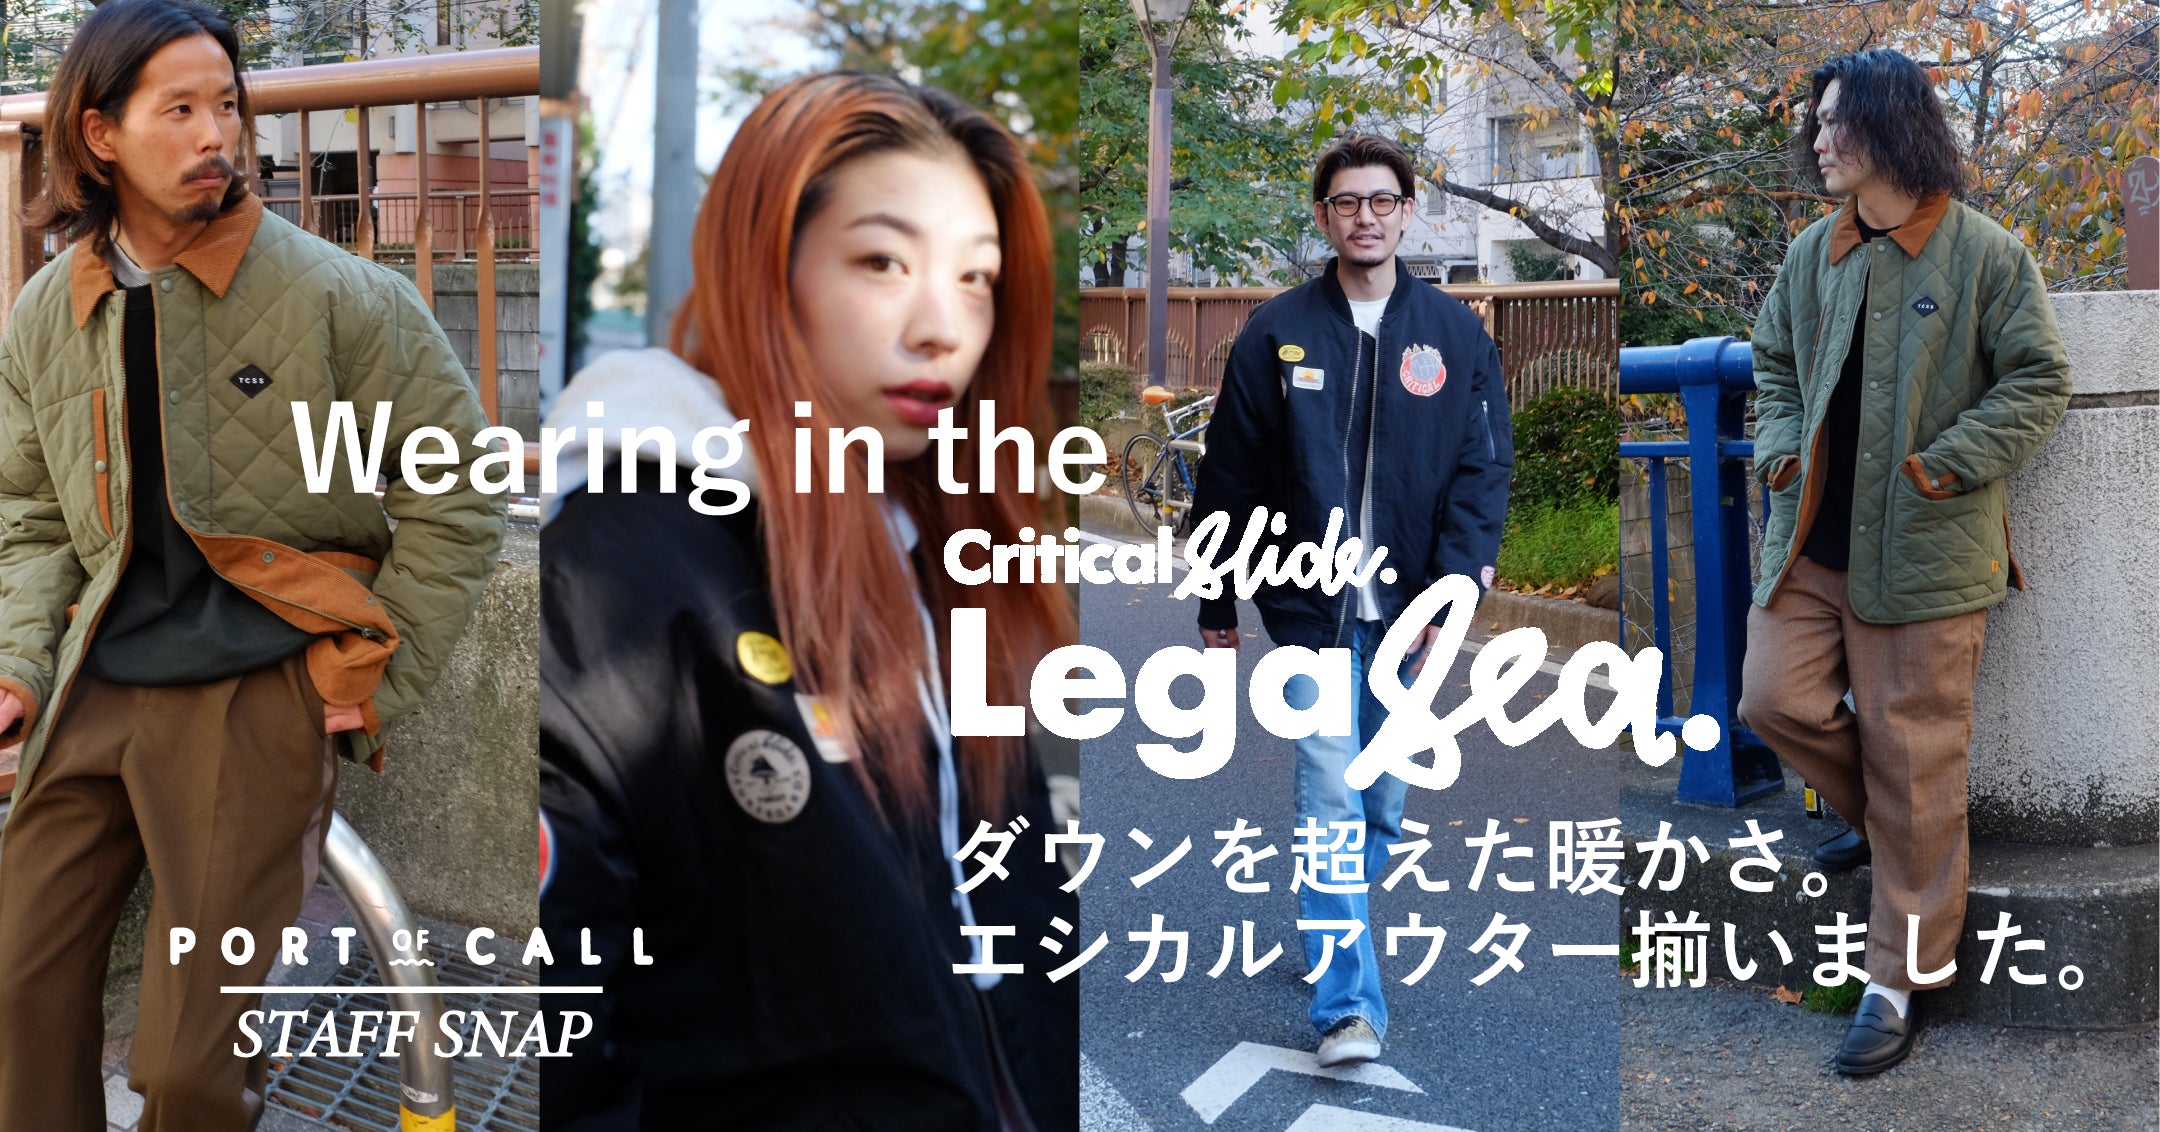 STAFF SNAP：Wearing in the LEGASEA – PORT OF CALL ONLINE